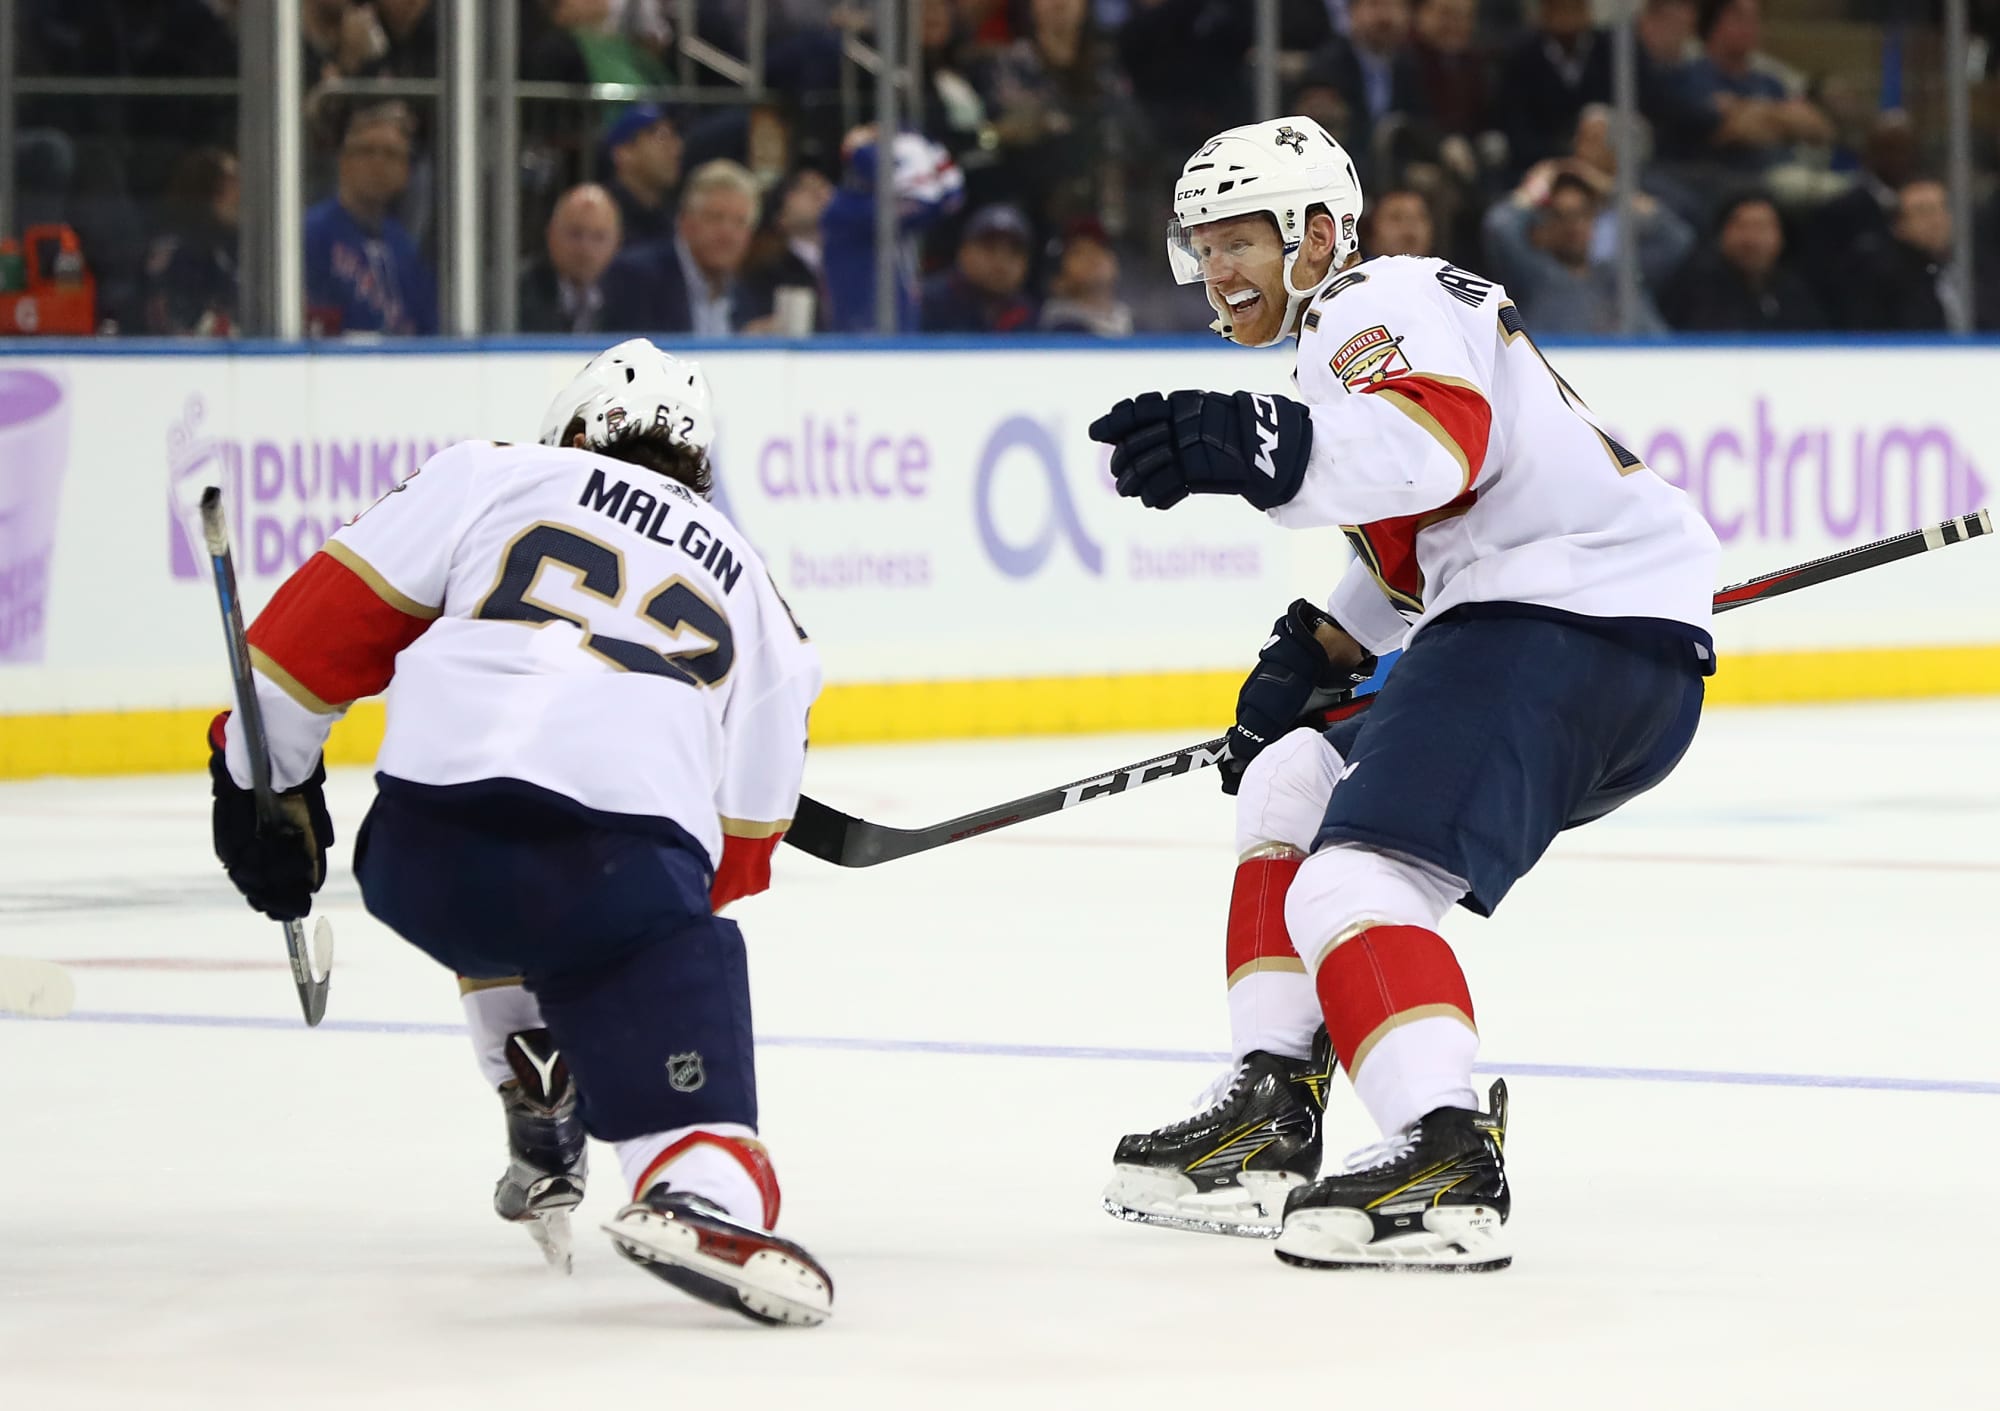 Florida Panthers come out on top, defeat the New York Rangers 54